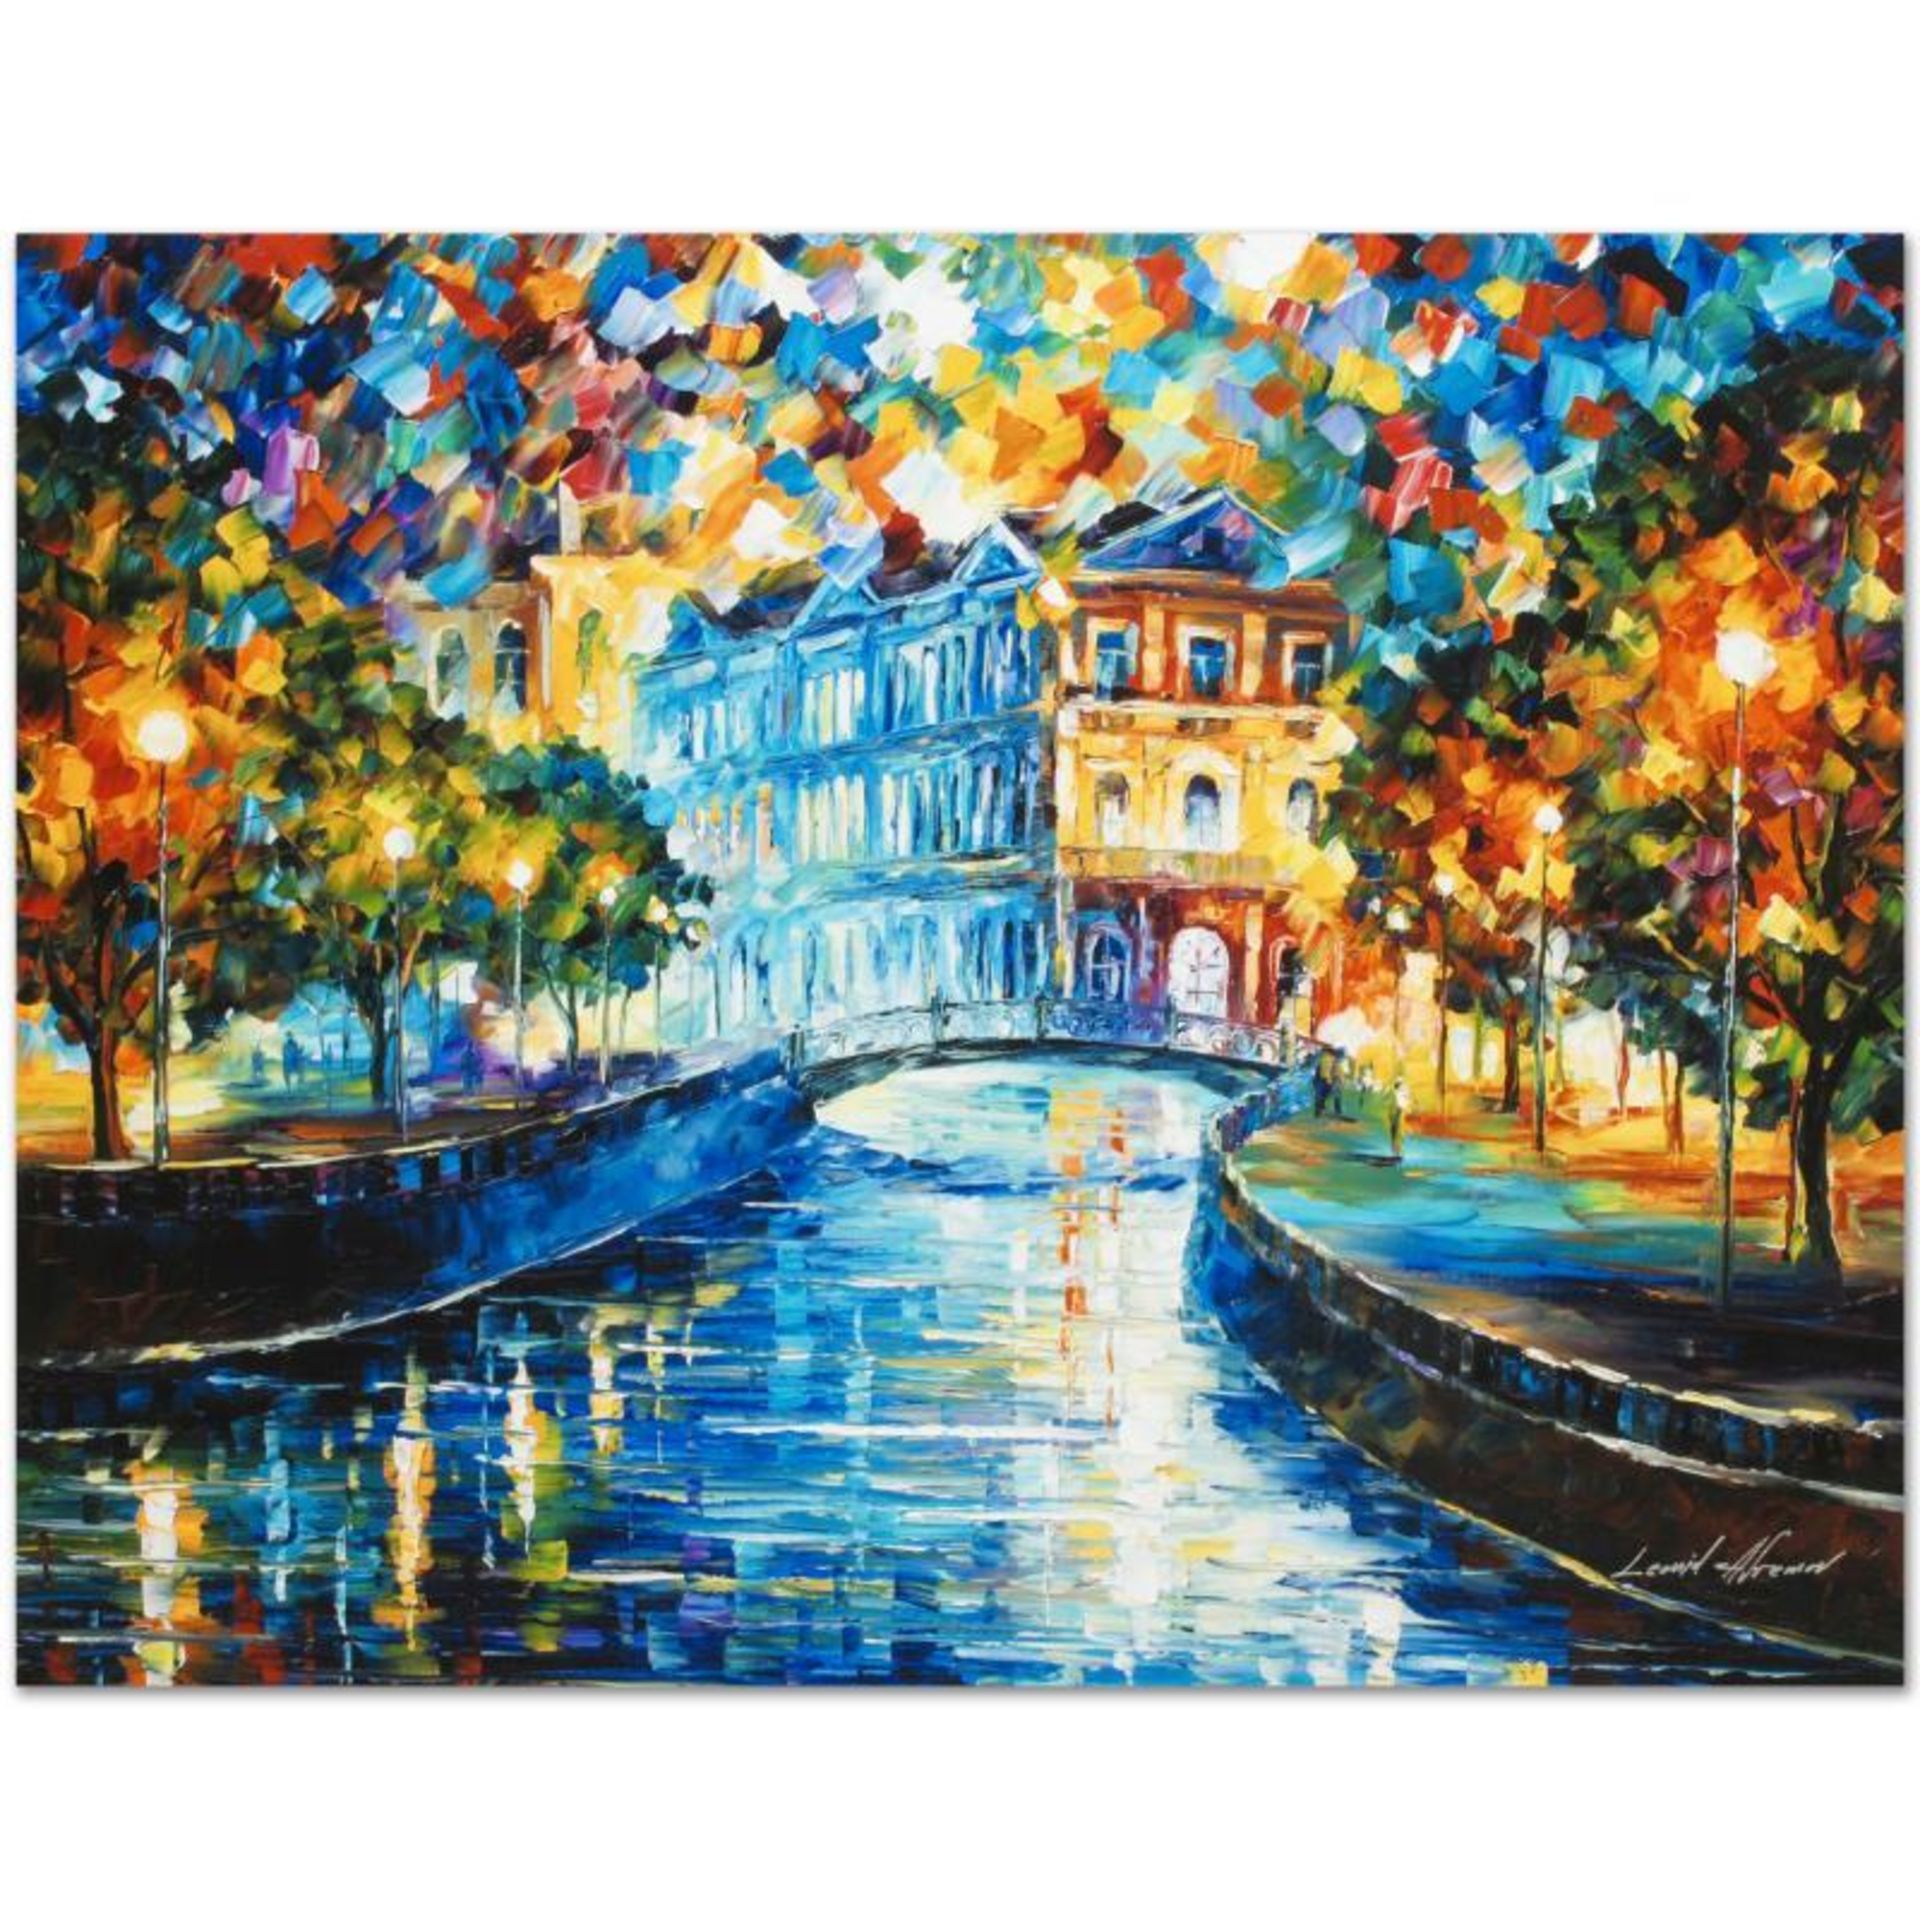 Leonid Afremov (1955-2019) "House on the Hill" Limited Edition Giclee on Canvas,